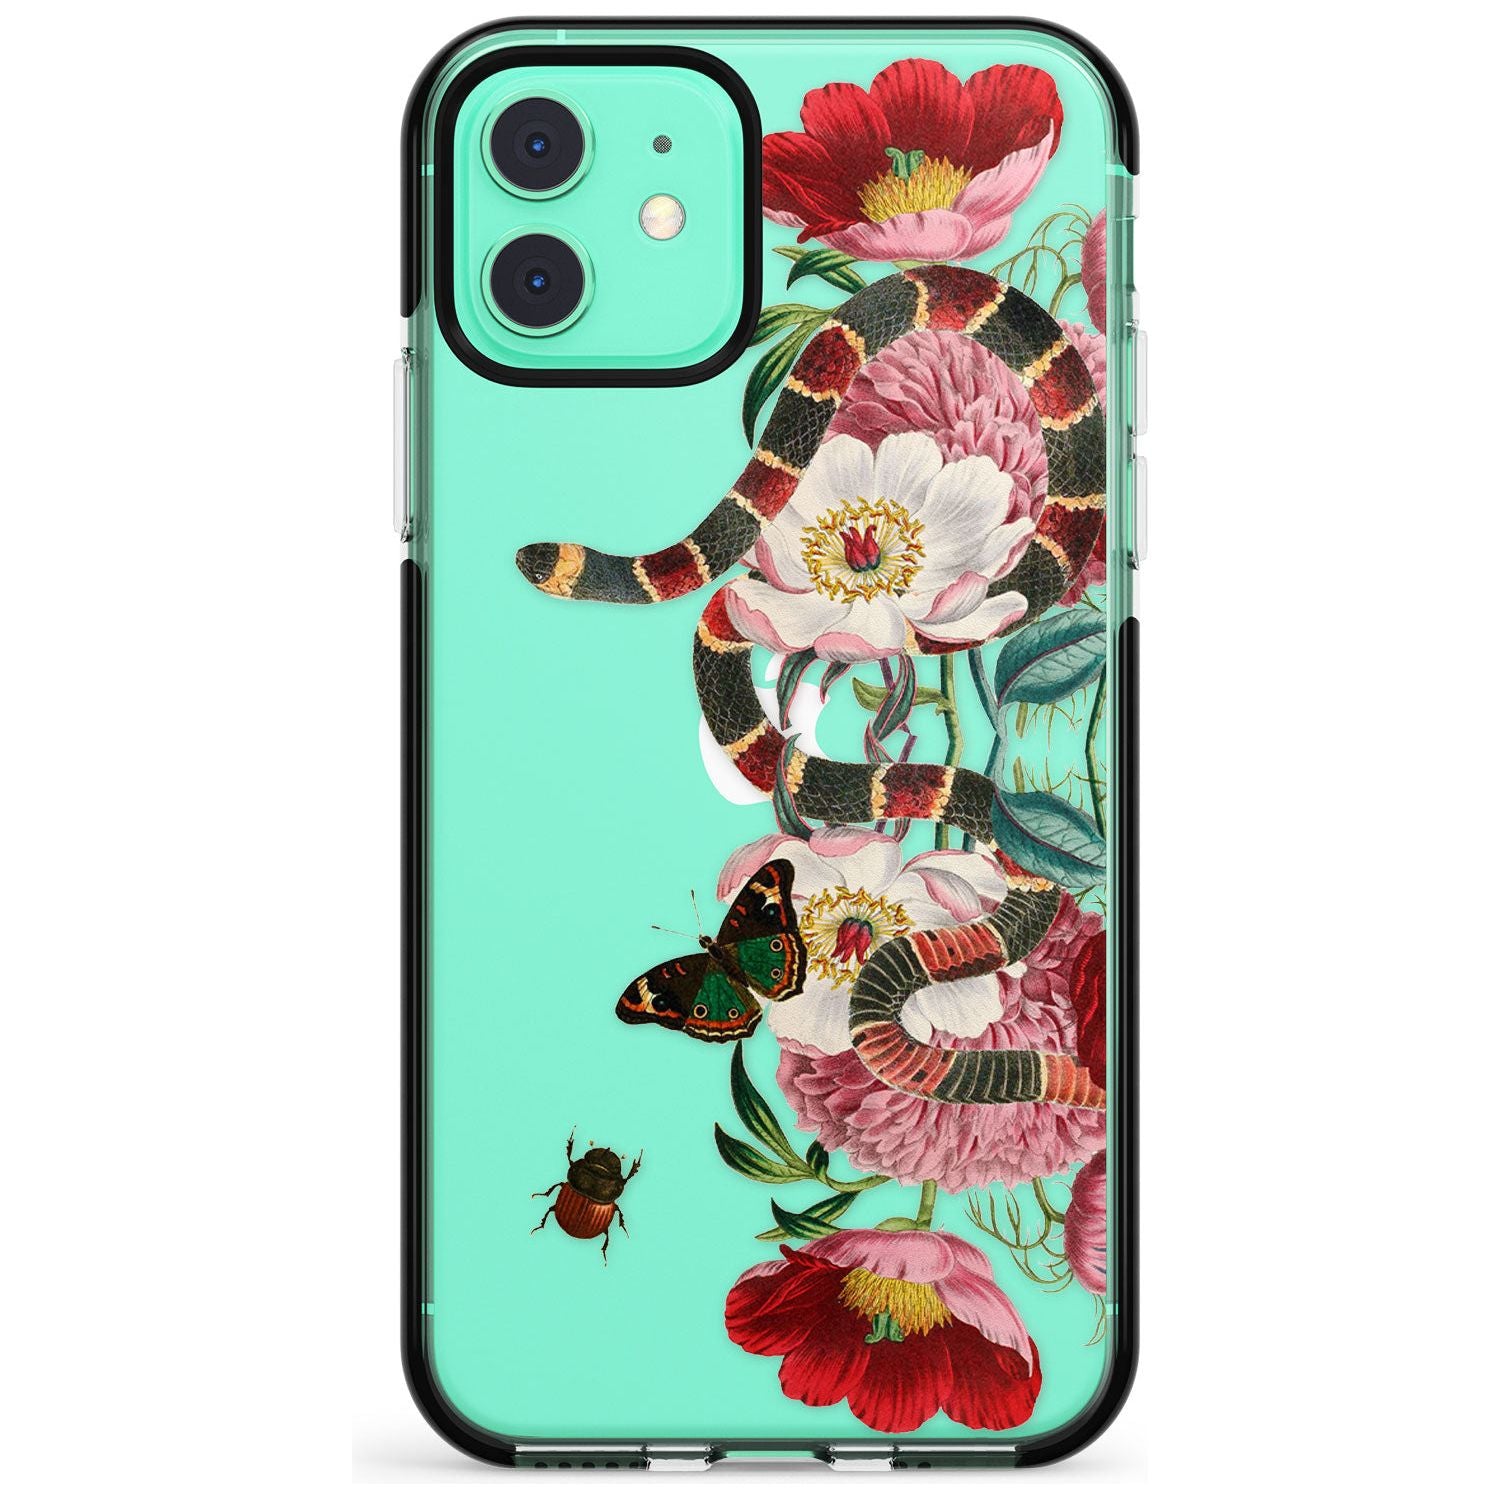 Floral Snake Pink Fade Impact Phone Case for iPhone 11 Pro Max